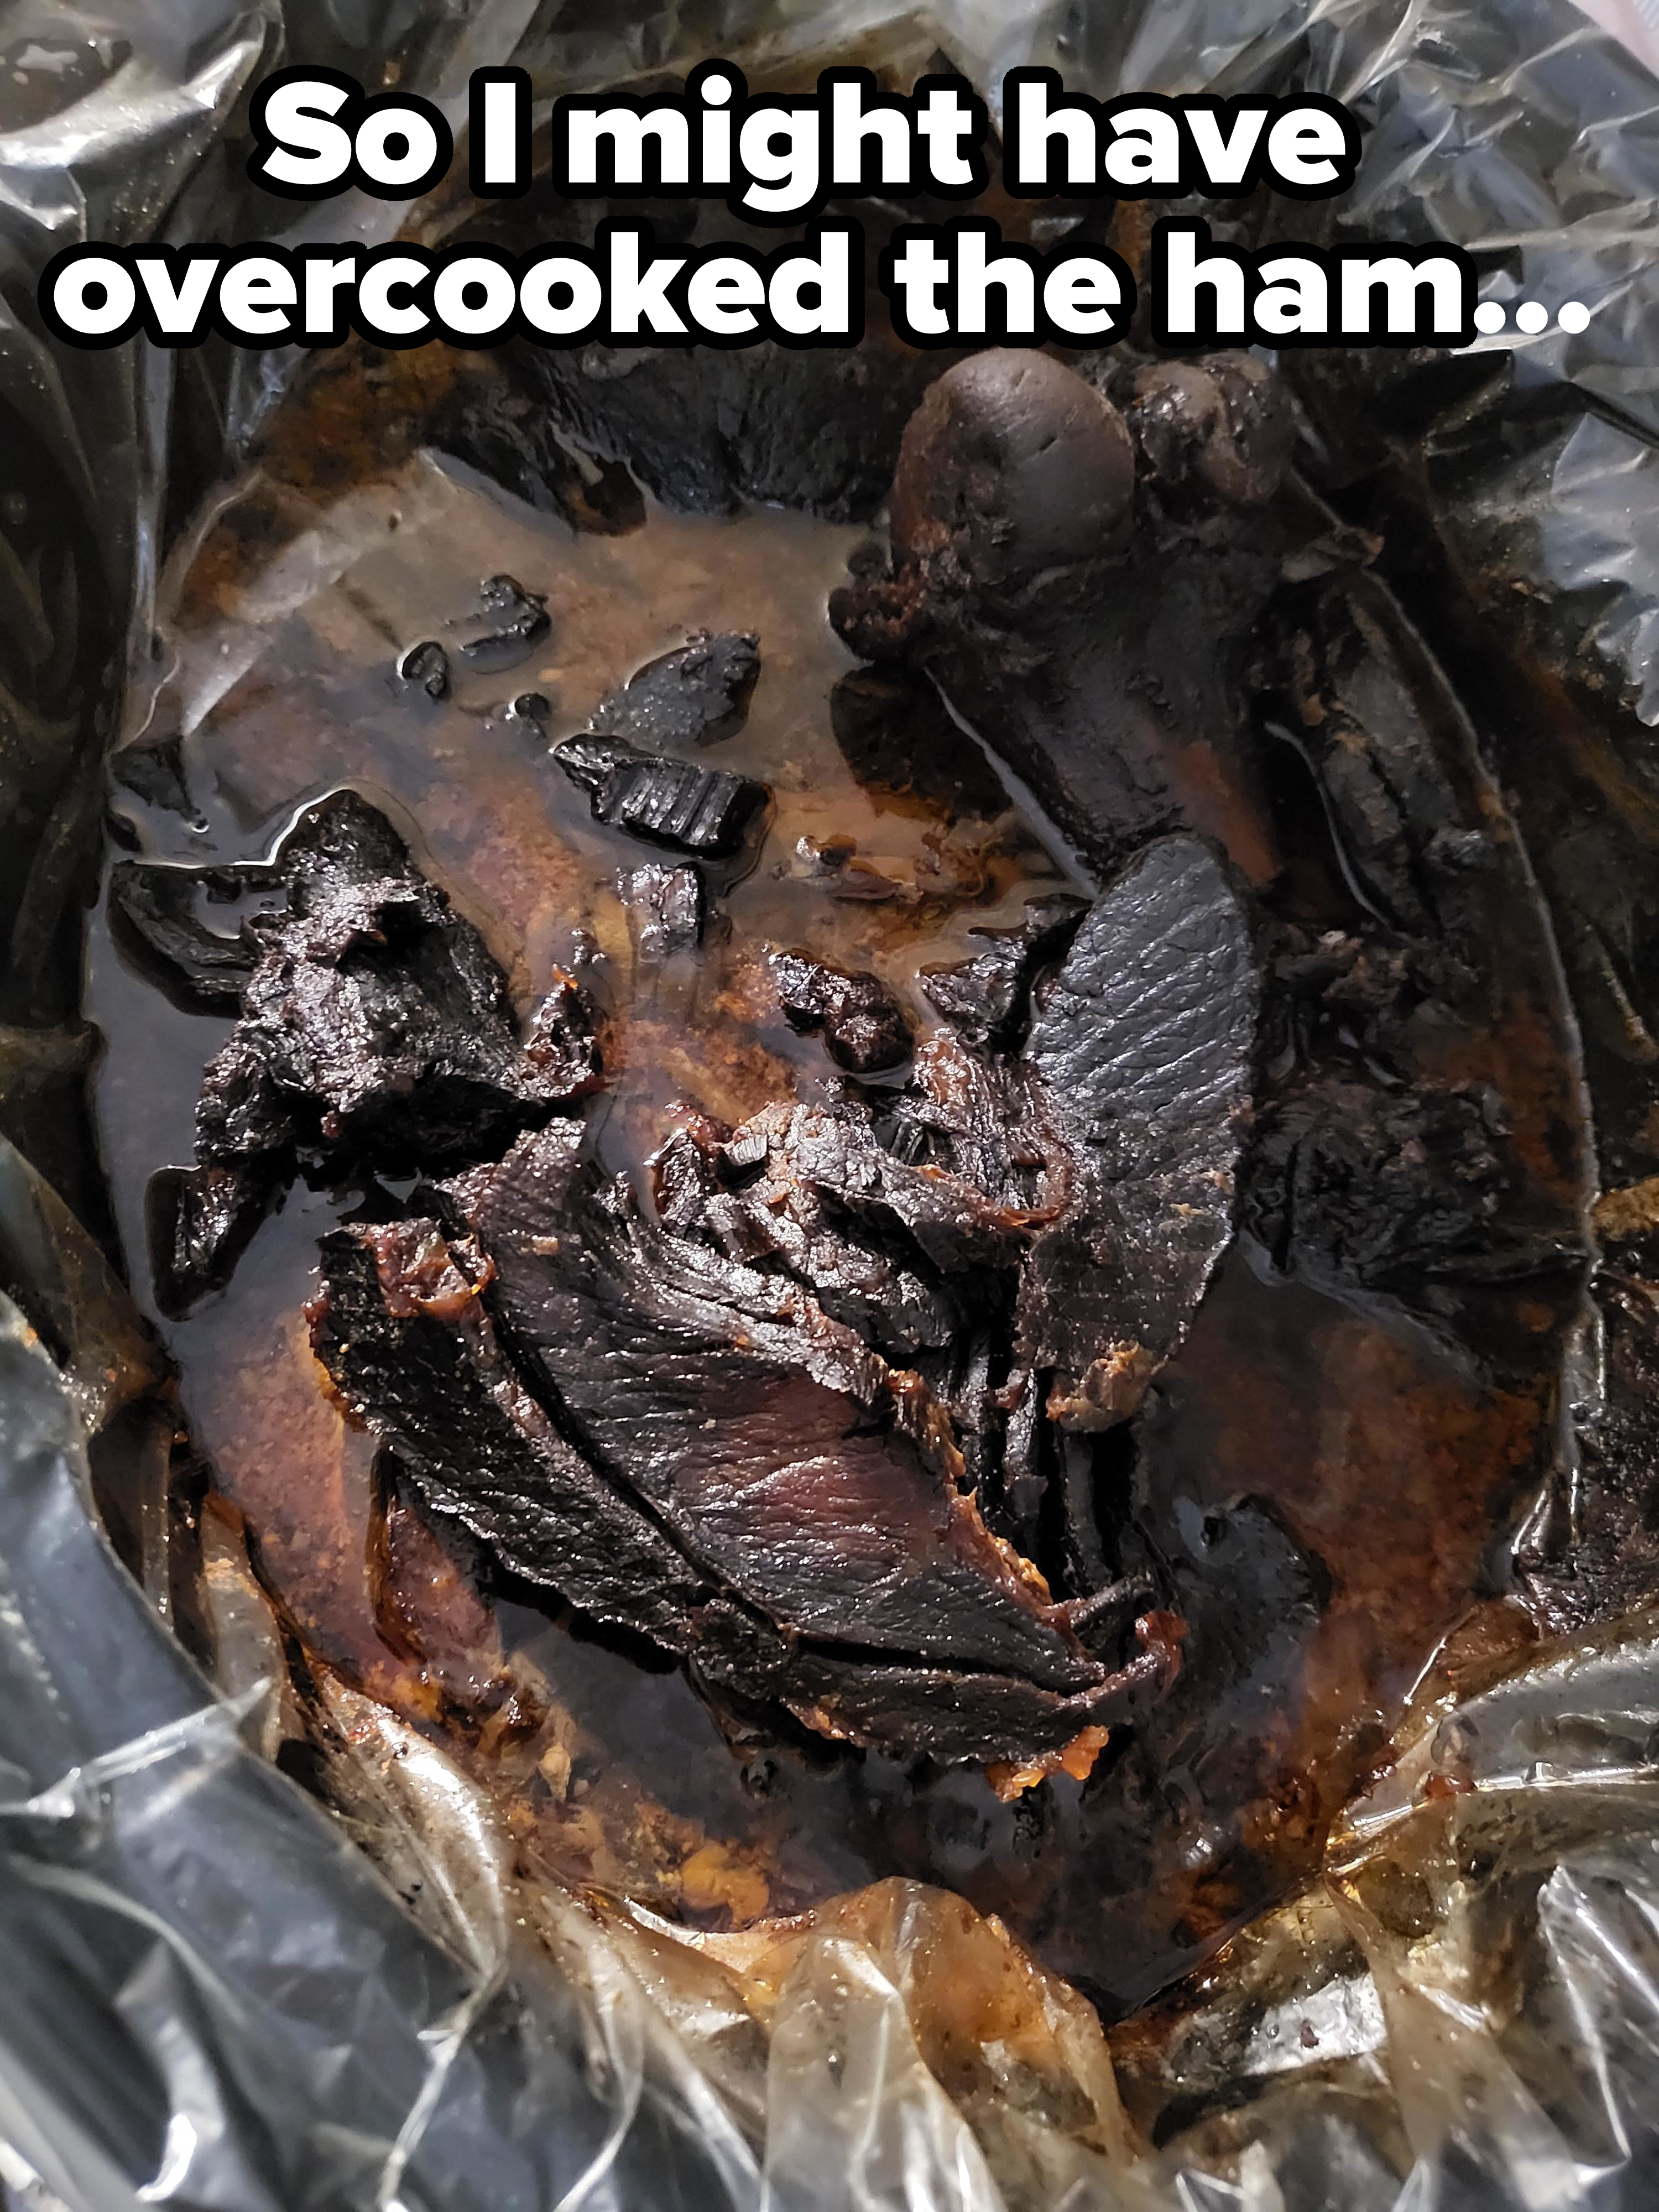 A gross, charred ham in pieces